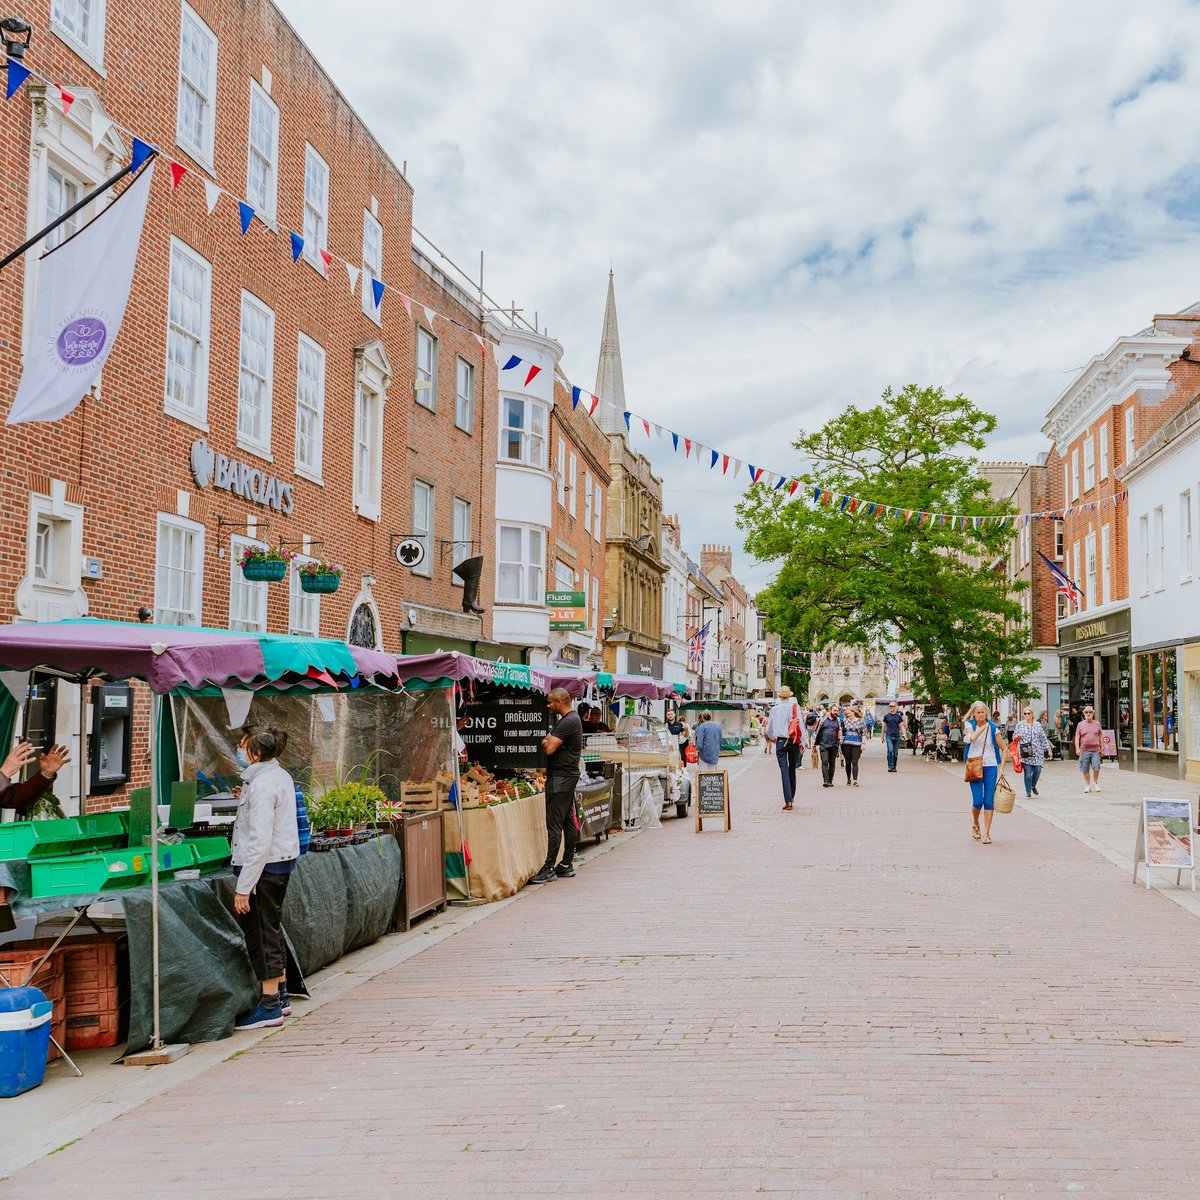 It's market day today in Chichester, and the Farmer's Market is expected to in the city streets this Friday from 9am to 2 pm with a delightful array of fresh produce and artisanal goods. #Chichester #FarmersMarket #SupportLocal